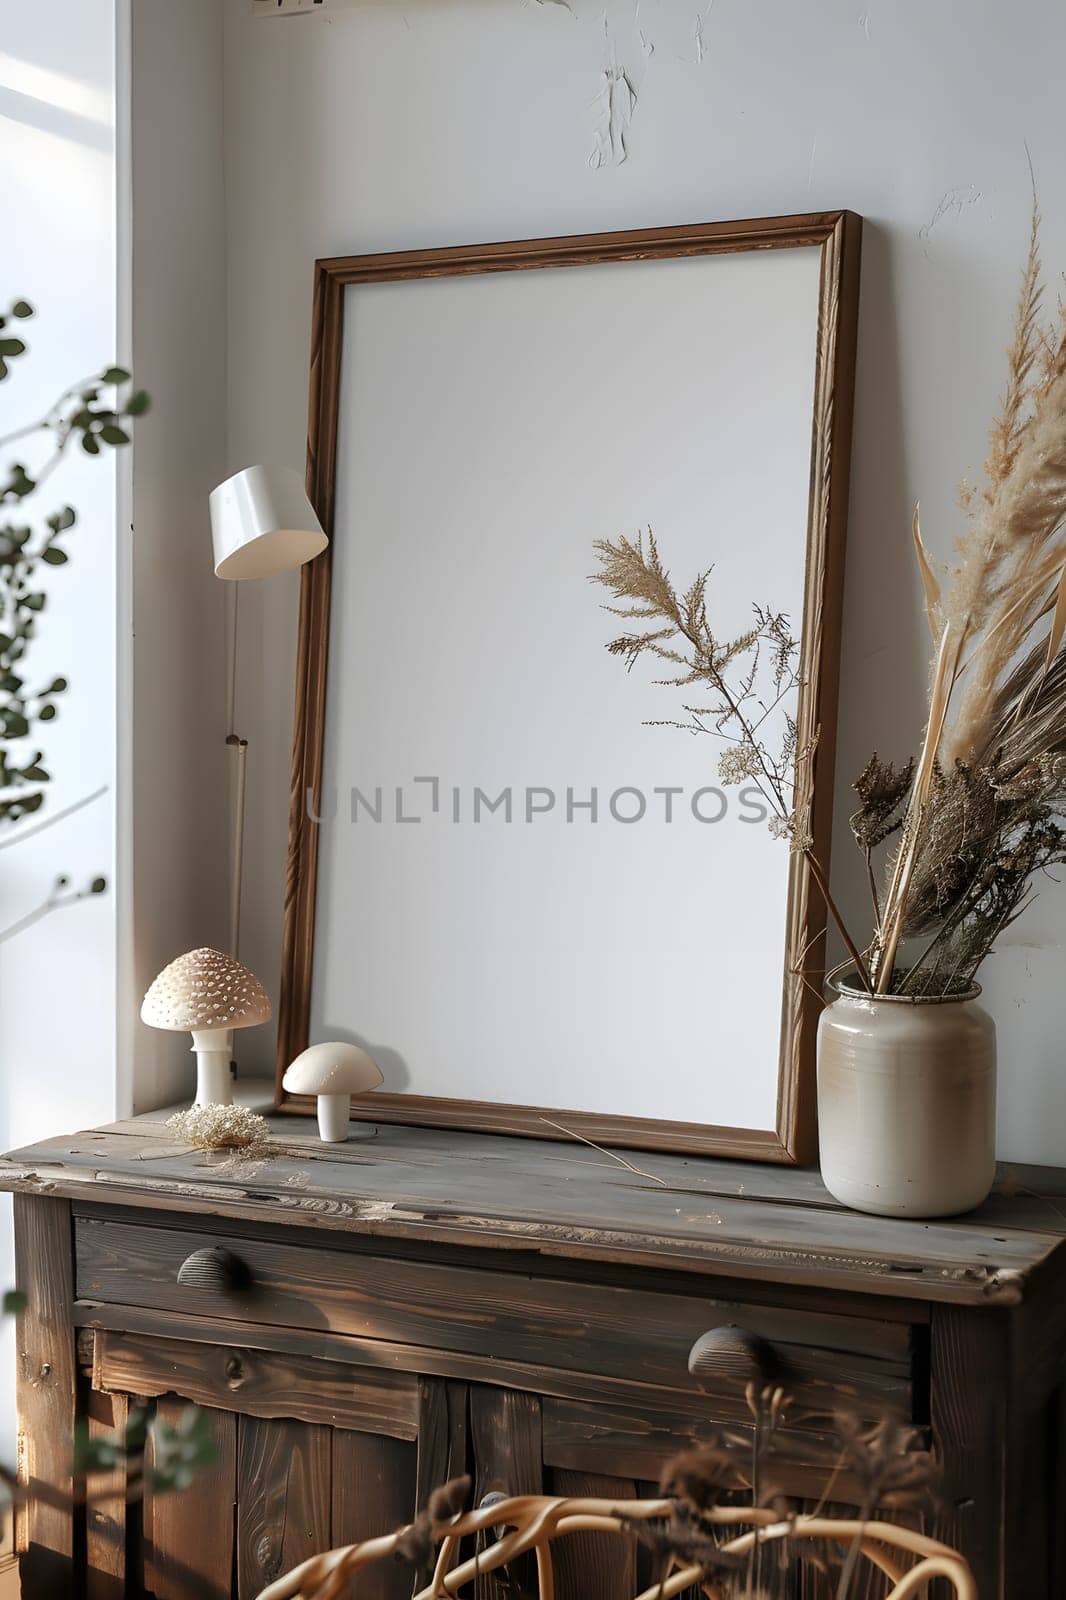 A rectangular metal picture frame hangs above a hardwood dresser, complemented by natural wood accents like twigs and a wooden table for a cohesive interior design